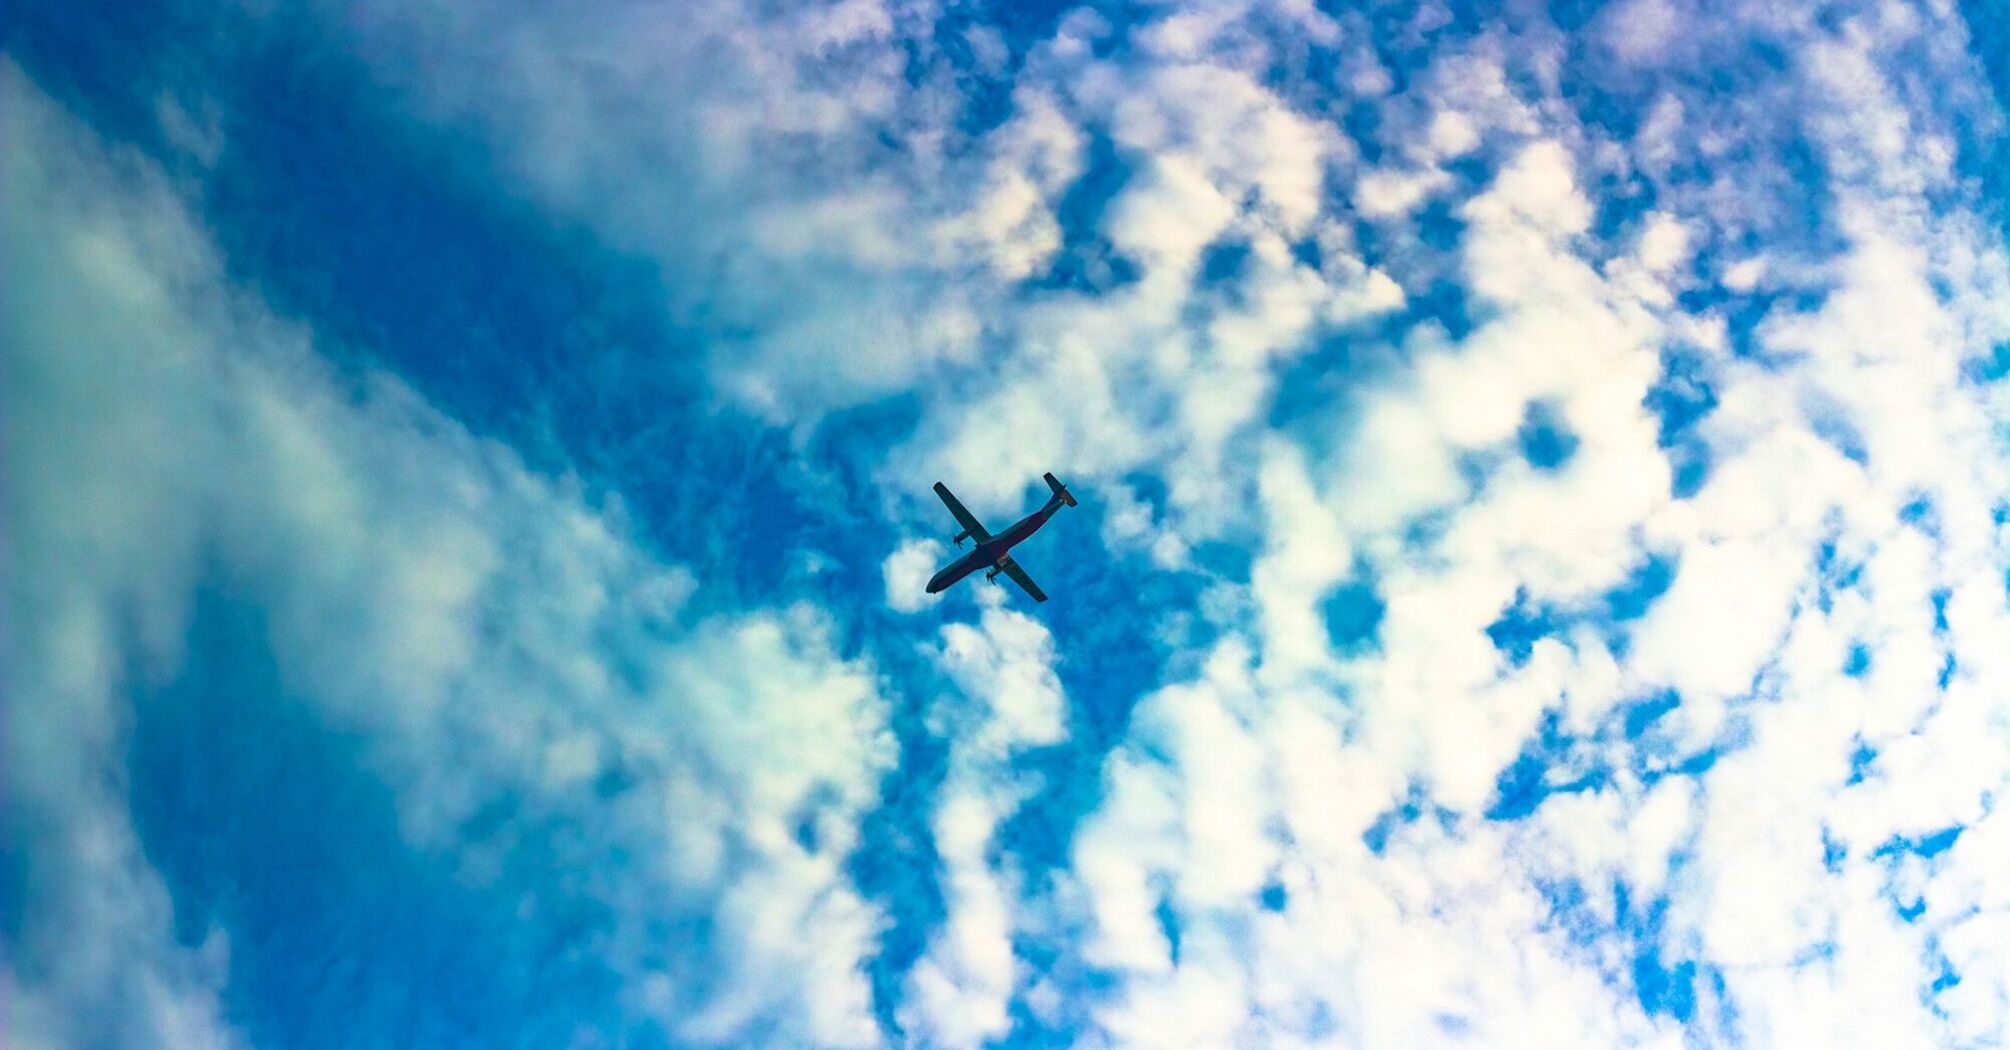 Airplane flying amidst clouds